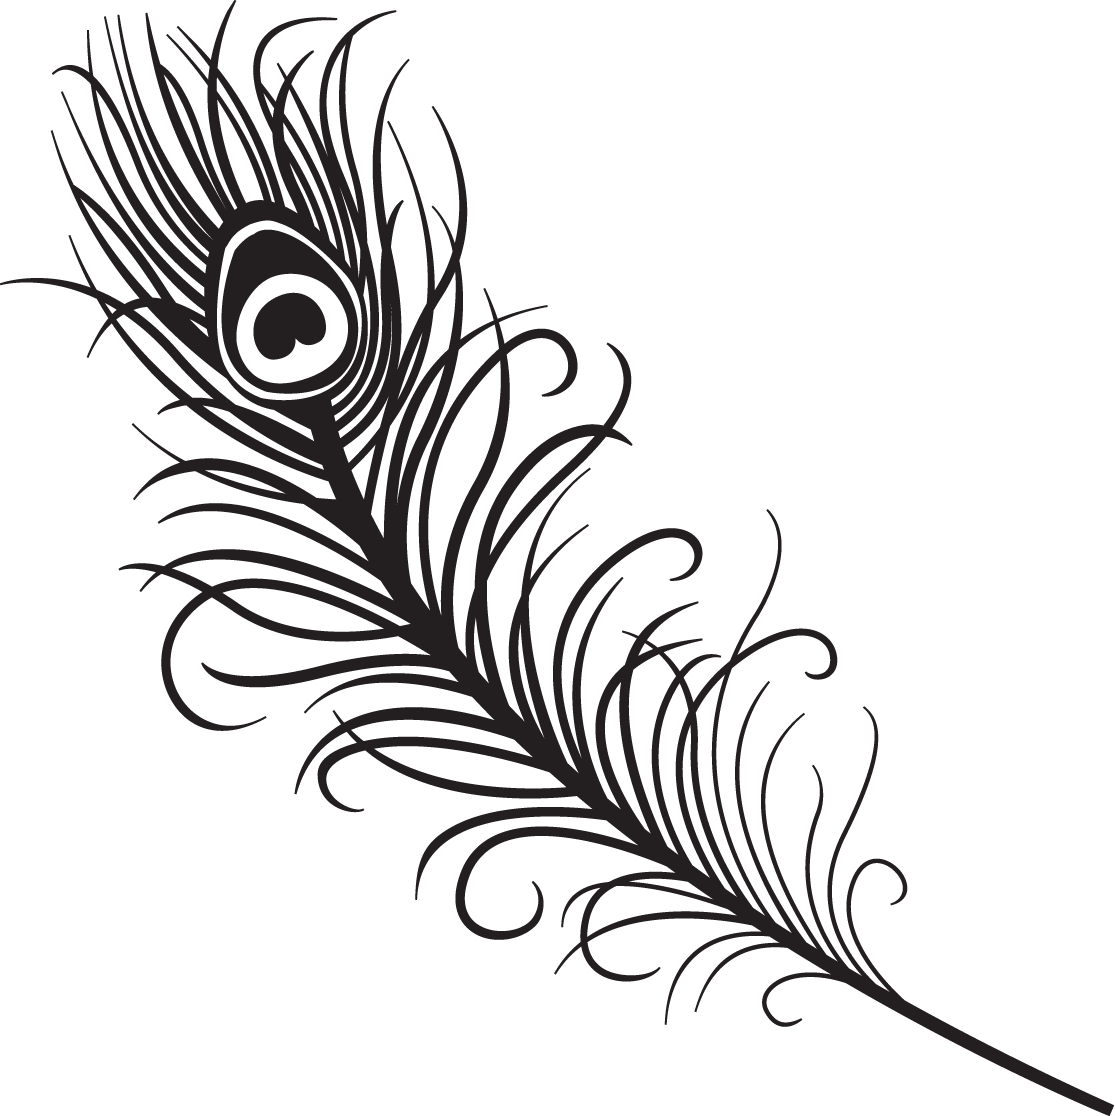 Black And White Peacock Designs